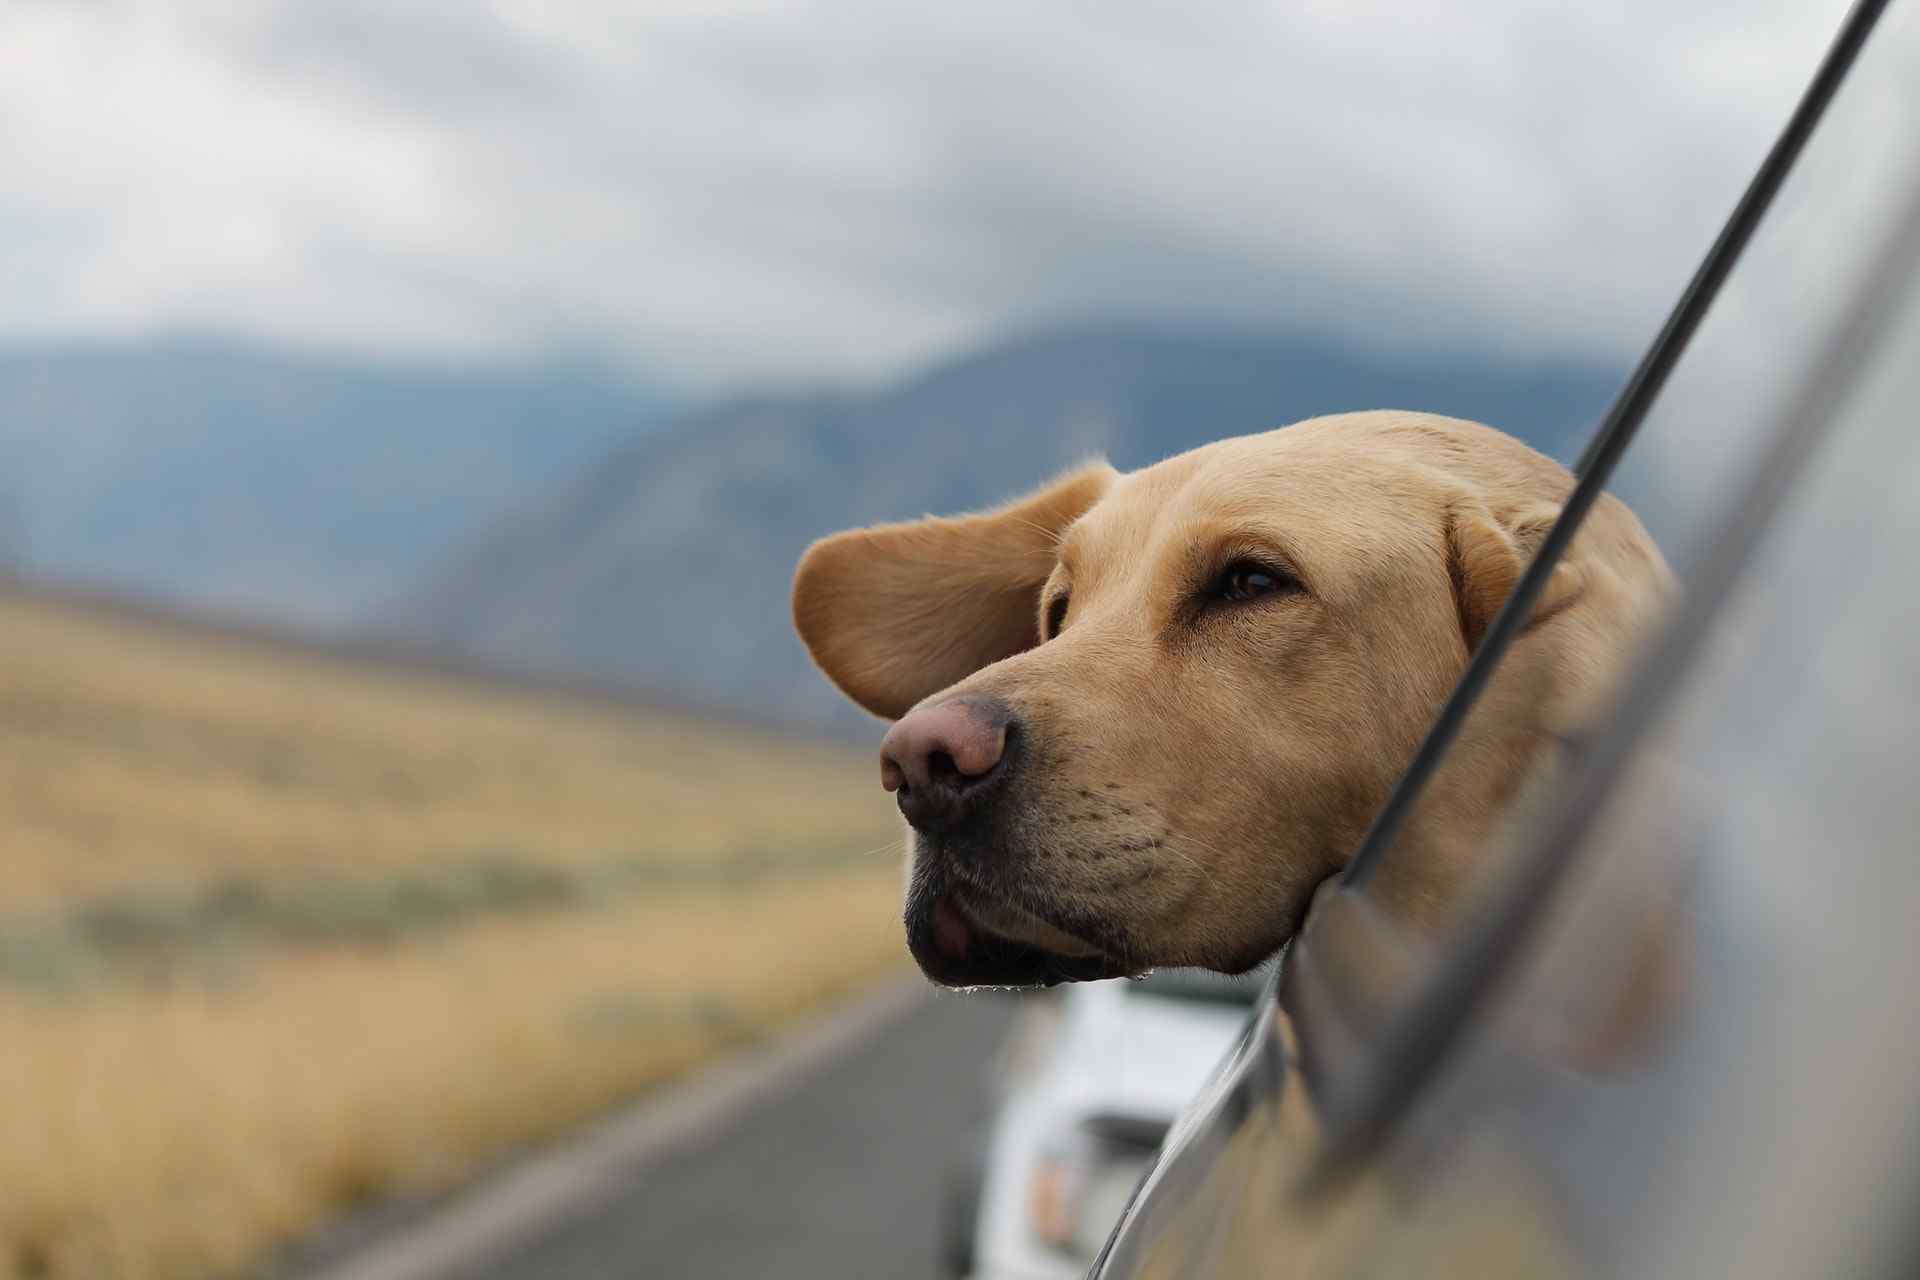 remove dog hair from car